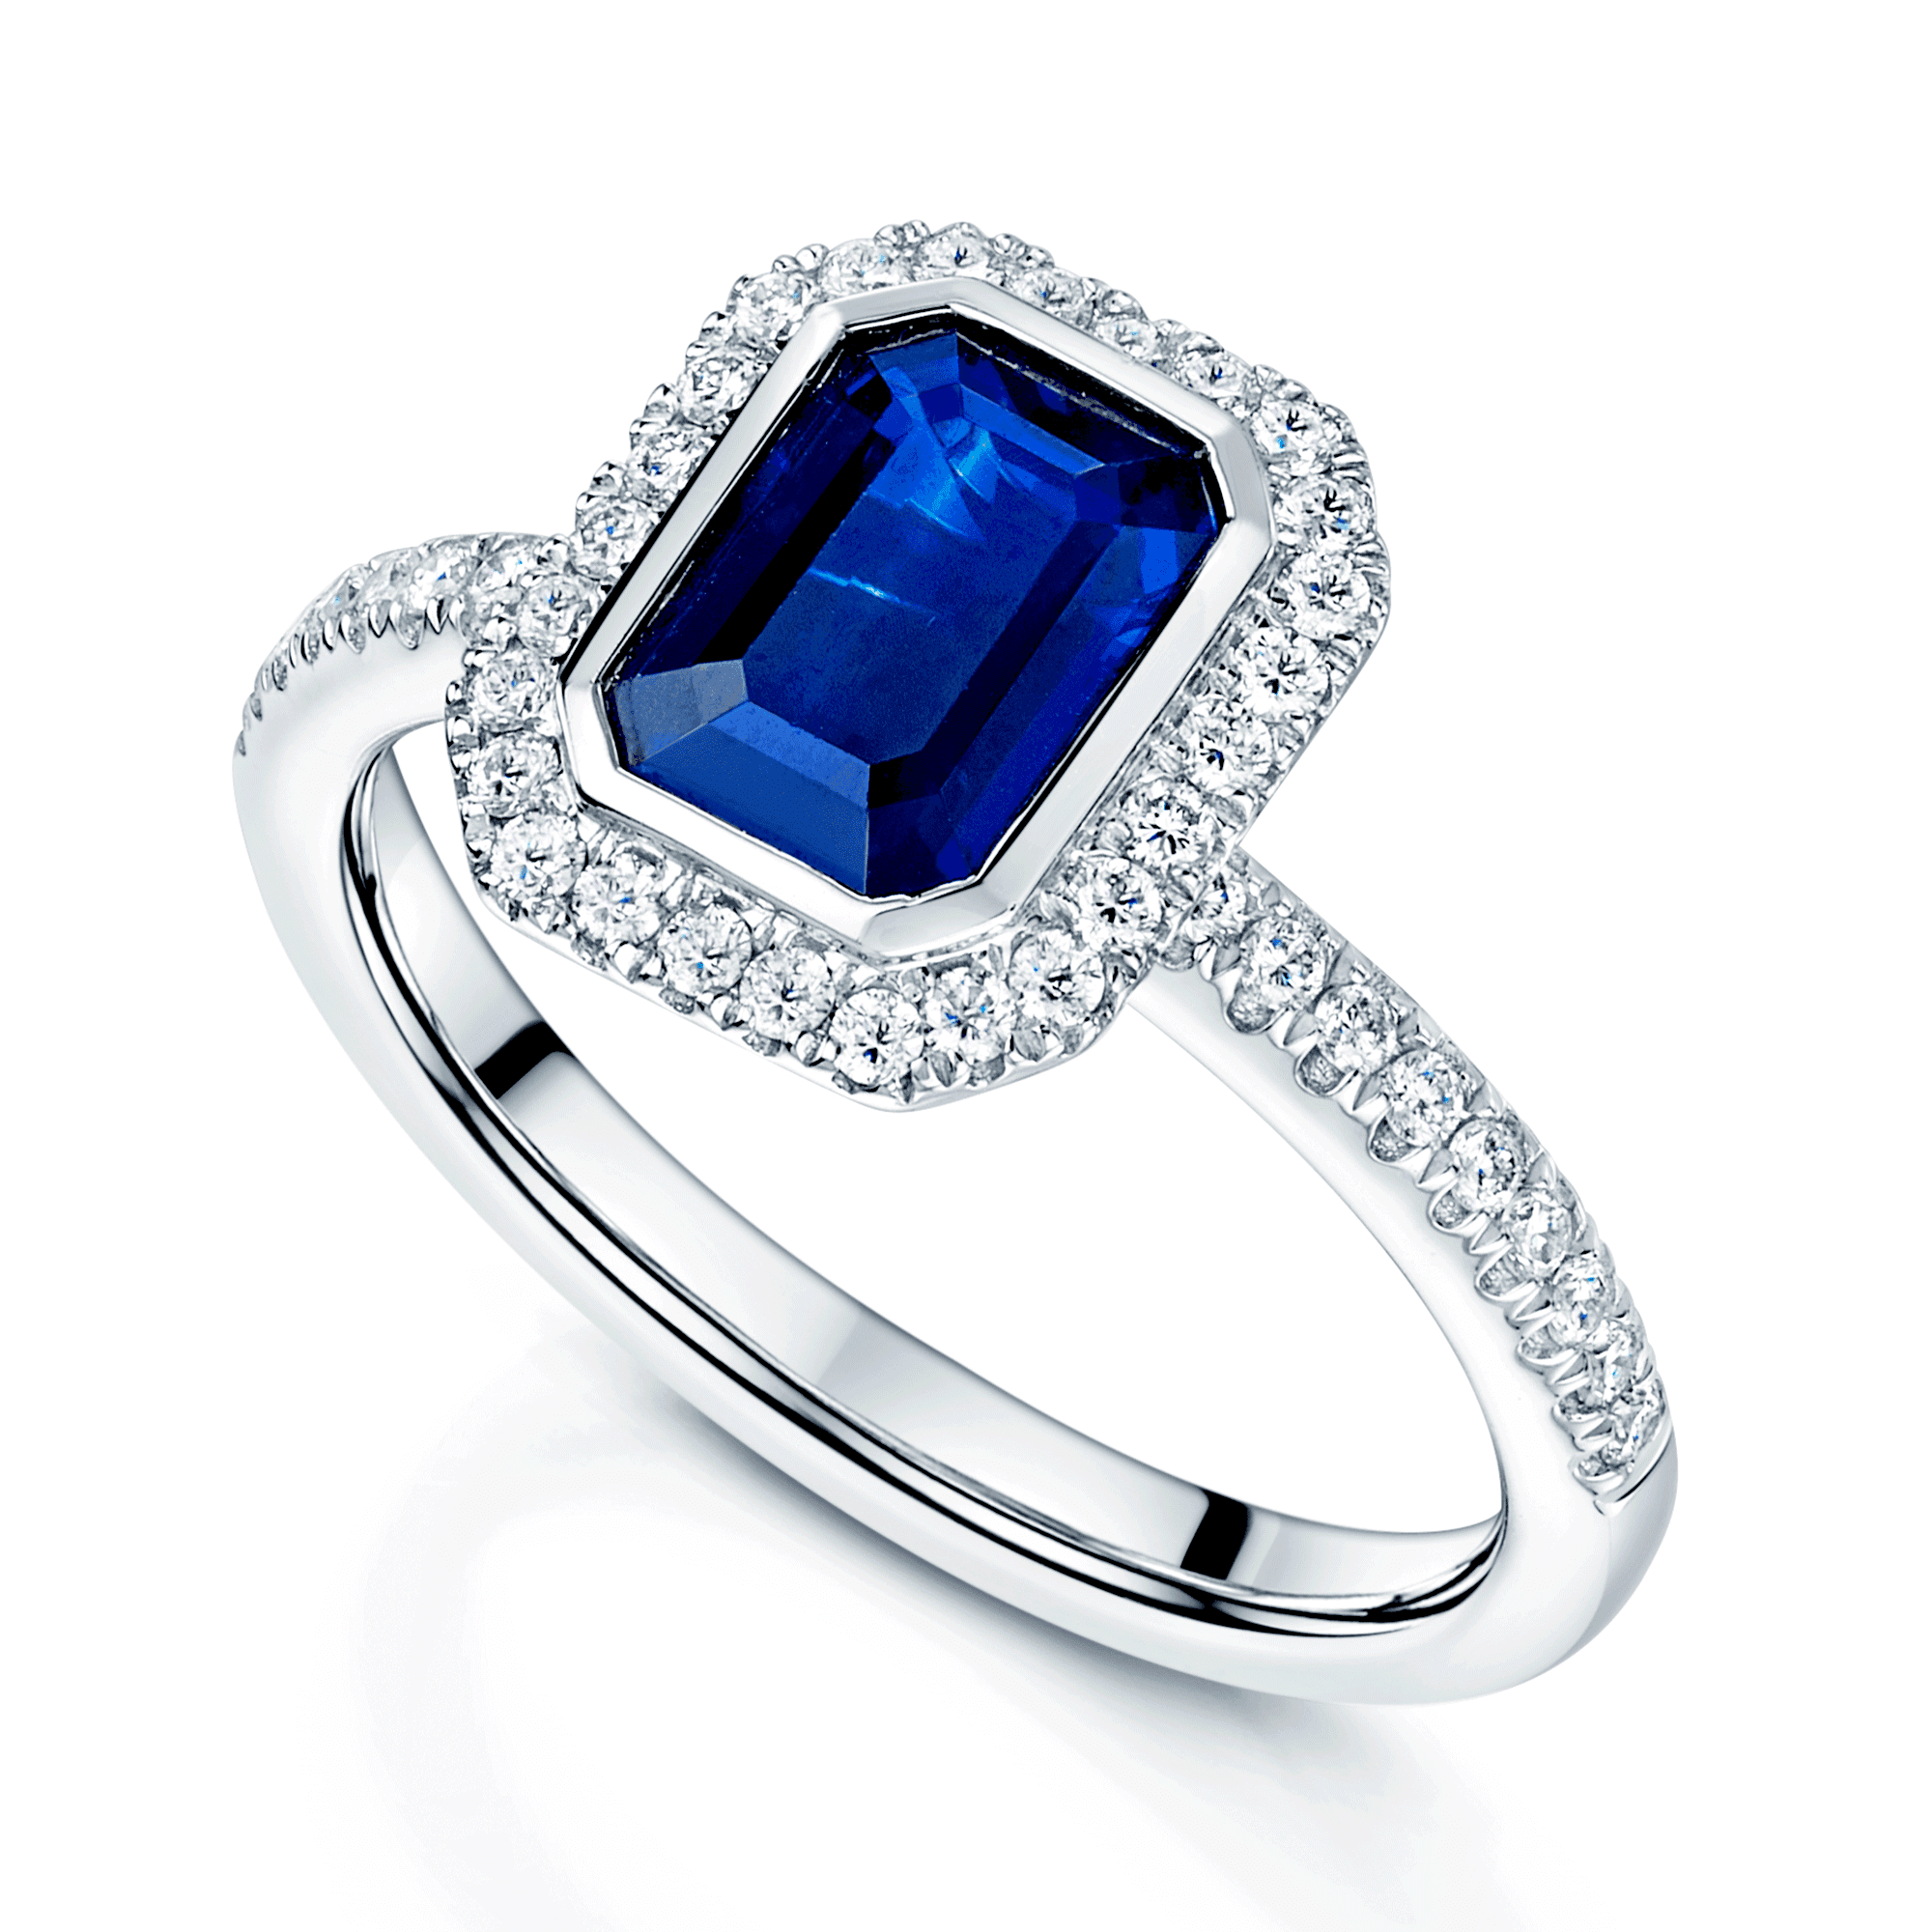 Platinum Emerald Cut Sapphire And Diamond Cluster Ring With Diamond Set Shoulders